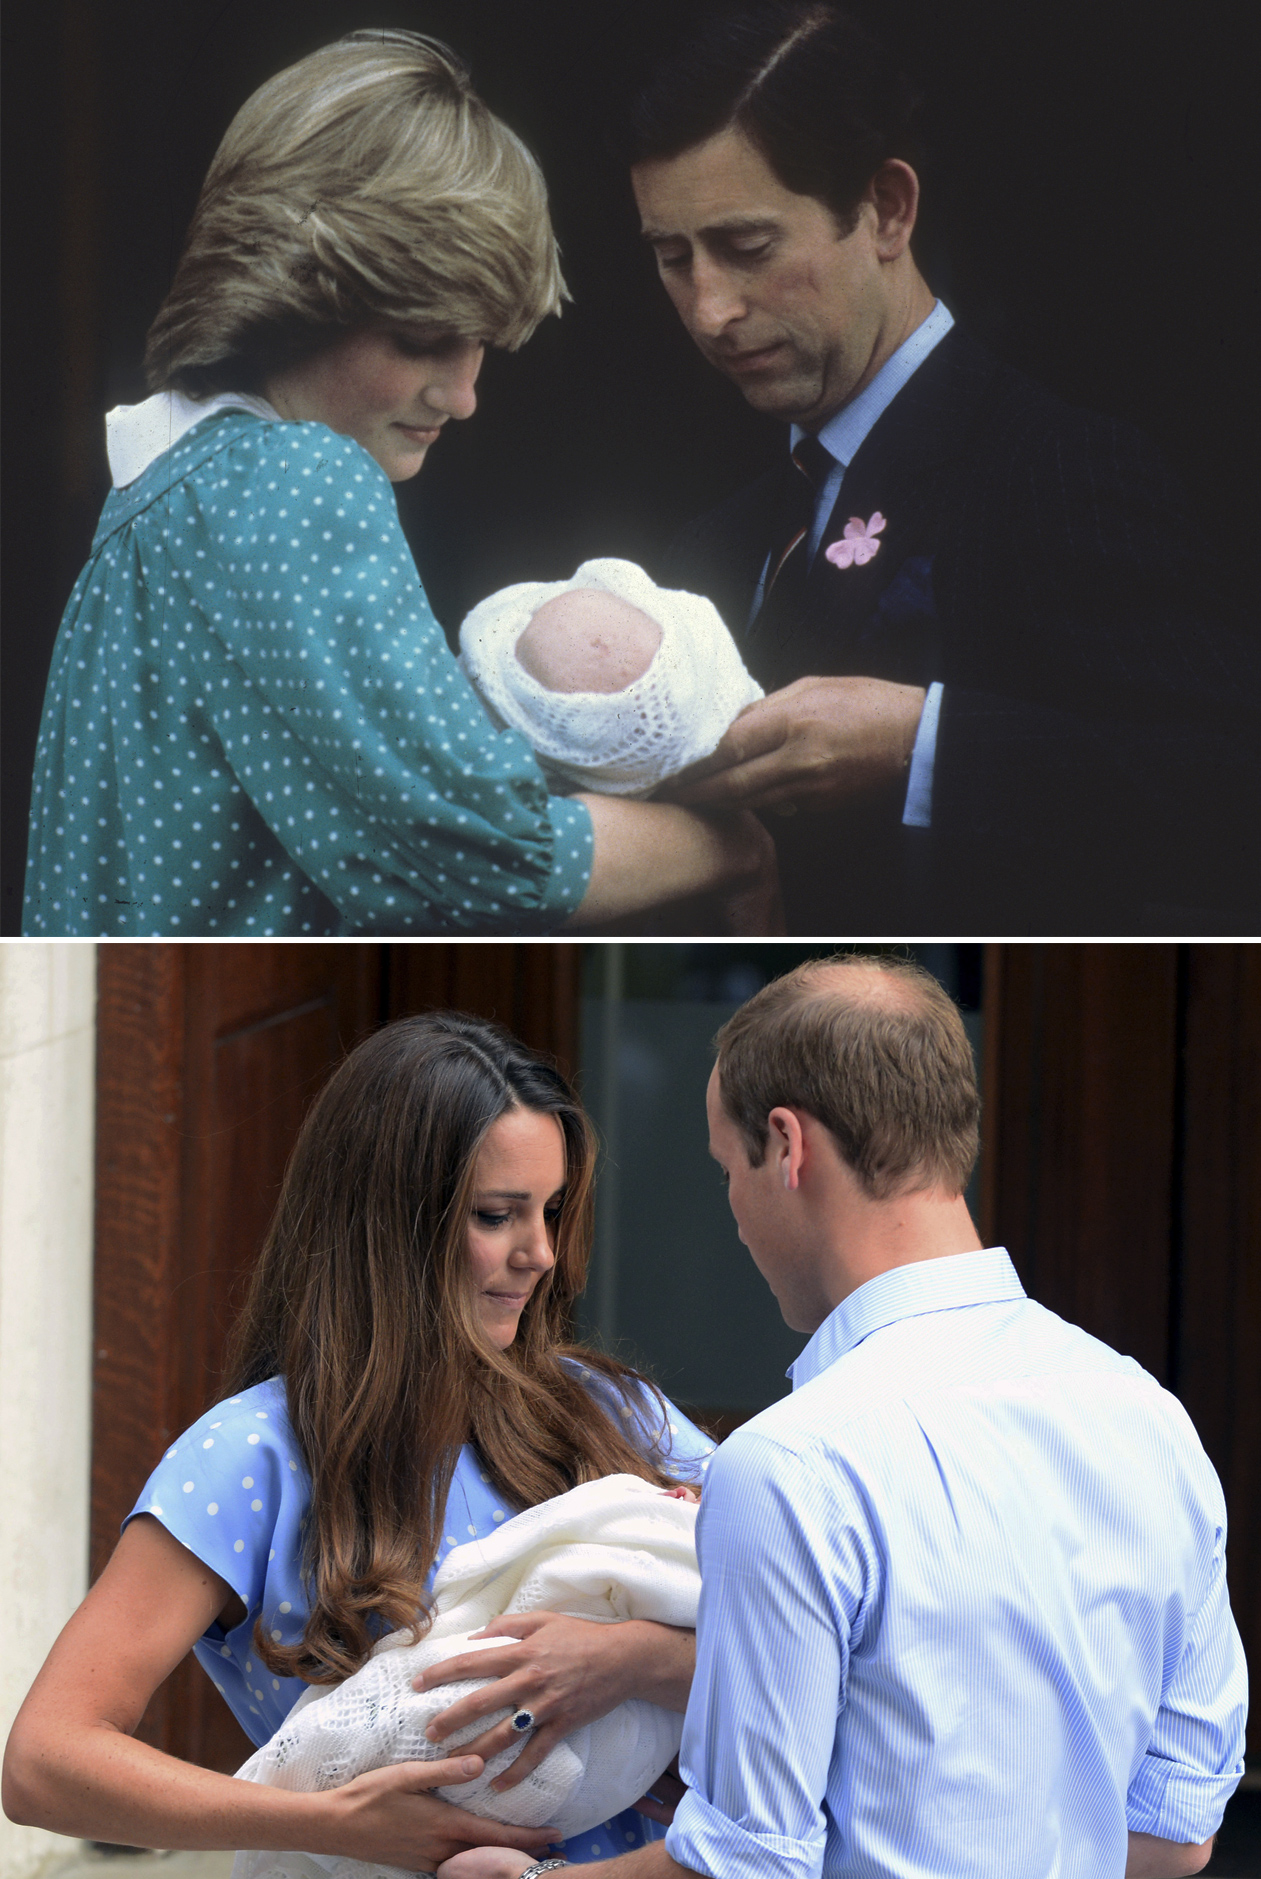 Top: Prince Charles and Princess Diana leave the Lindon Wing of St. Mary's Hospital with Prince William in London, July 22, 1982. Bottom: Catherine, Duchess of Cambridge, and Prince William leave the Lindon Wing of St. Mary's Hospital with Prince George, July 23, 2013.